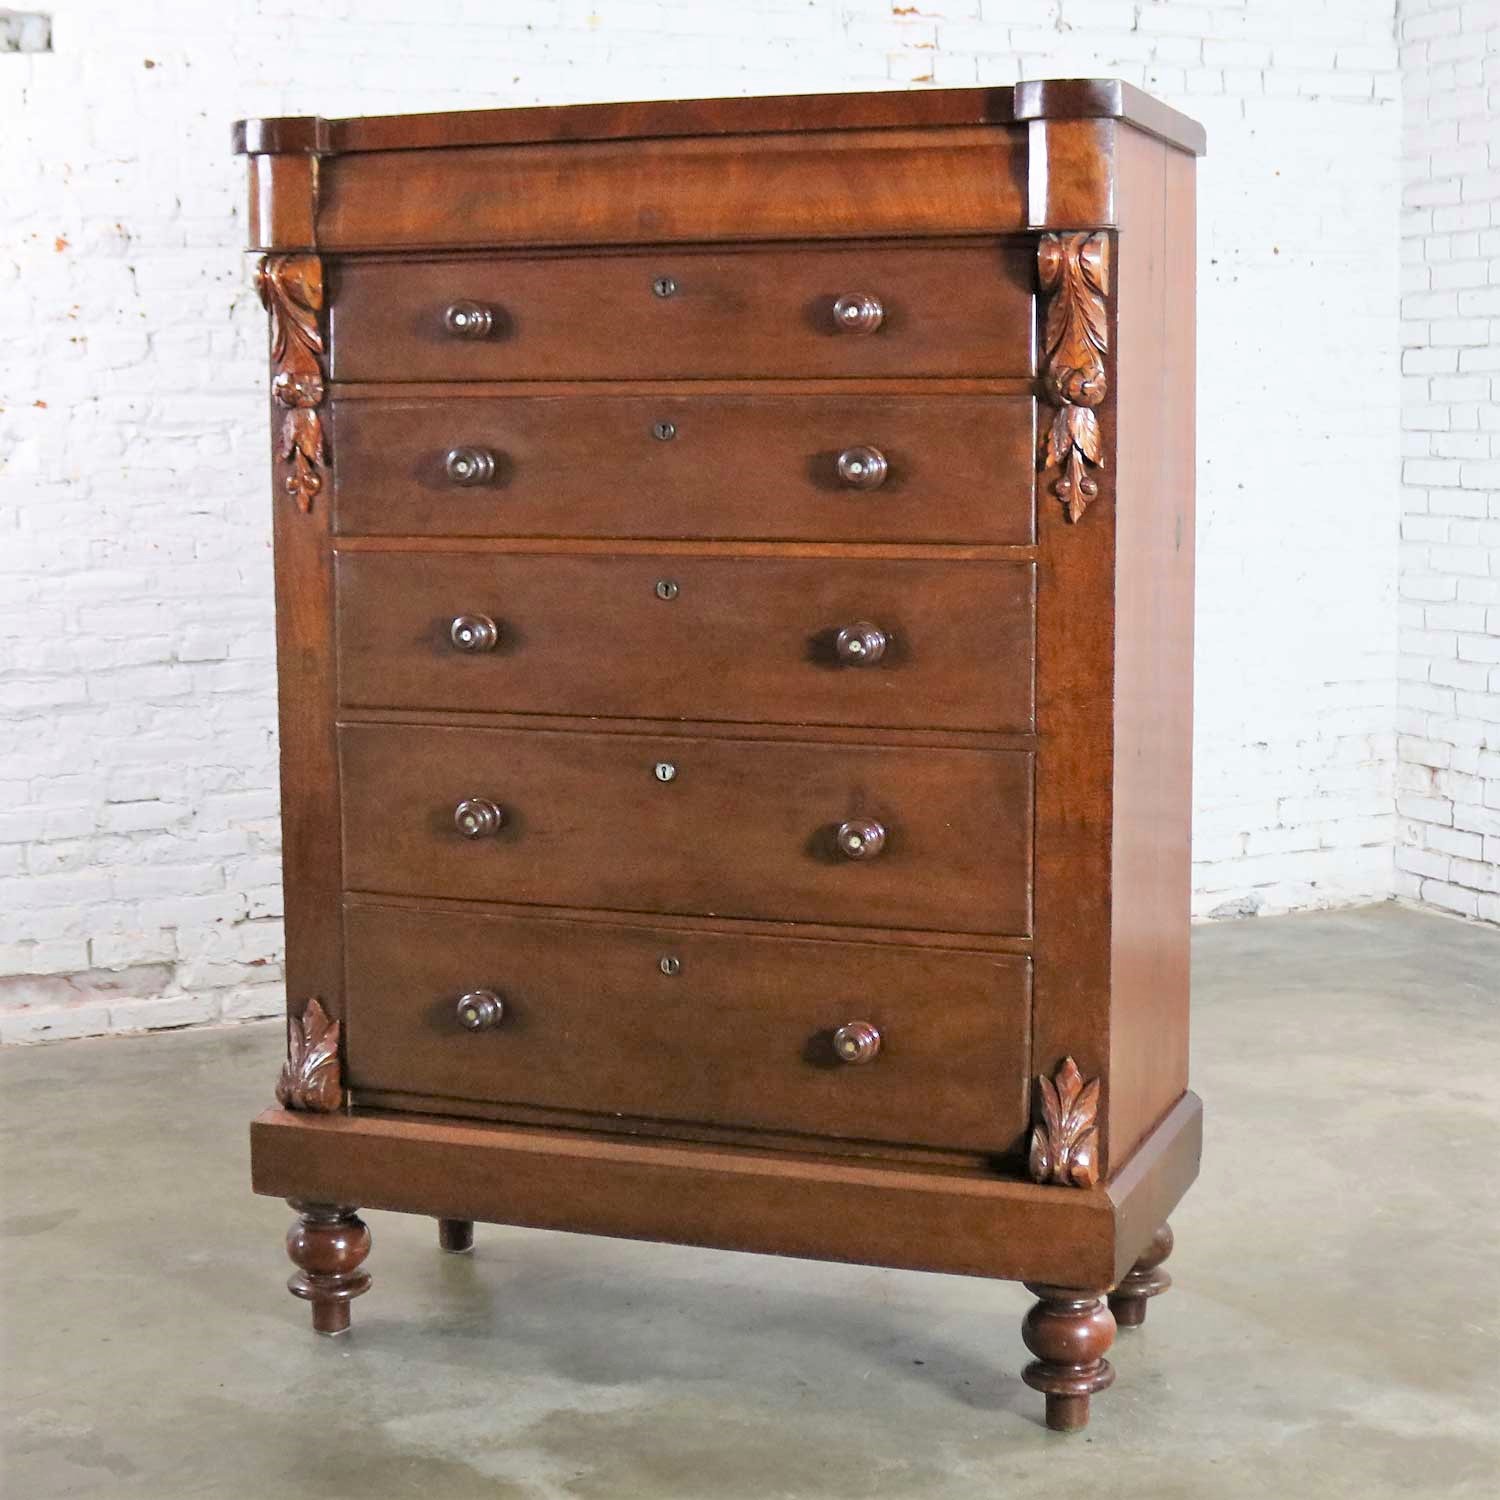 Tall Antique Edwardian Chest of Drawers Burl Front Mother of Pearl and Acanthus Carving